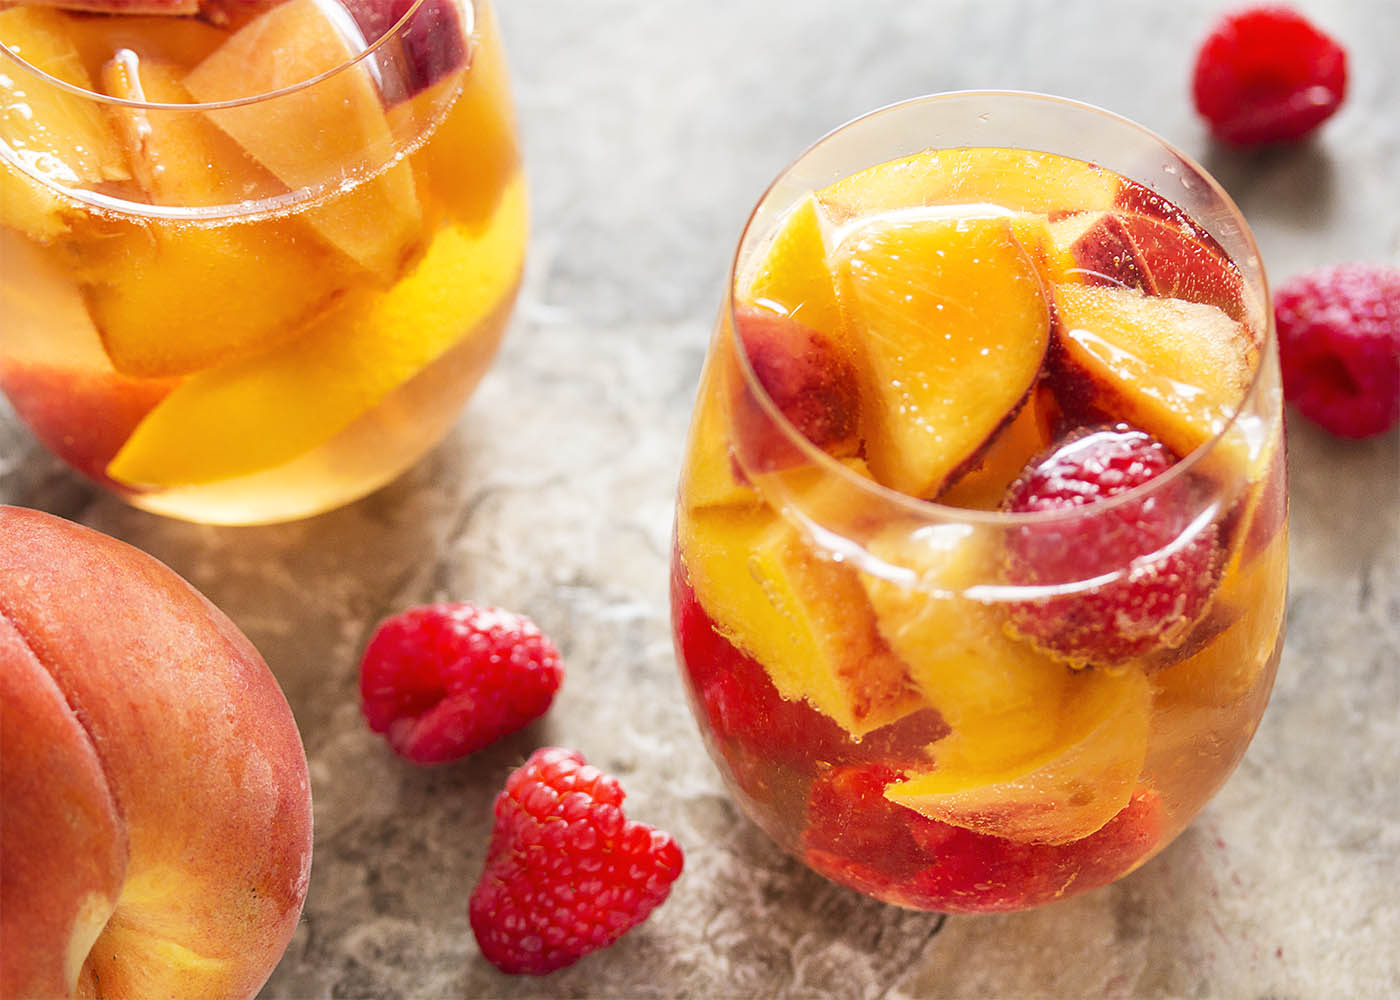 This sparkling white peach sangria is super easy to mix together and just as easy to enjoy on a warm day. Not too sweet and full of fizz from the bubbly, it's the taste of summer in a glass! | justalittlebitofbacon.com